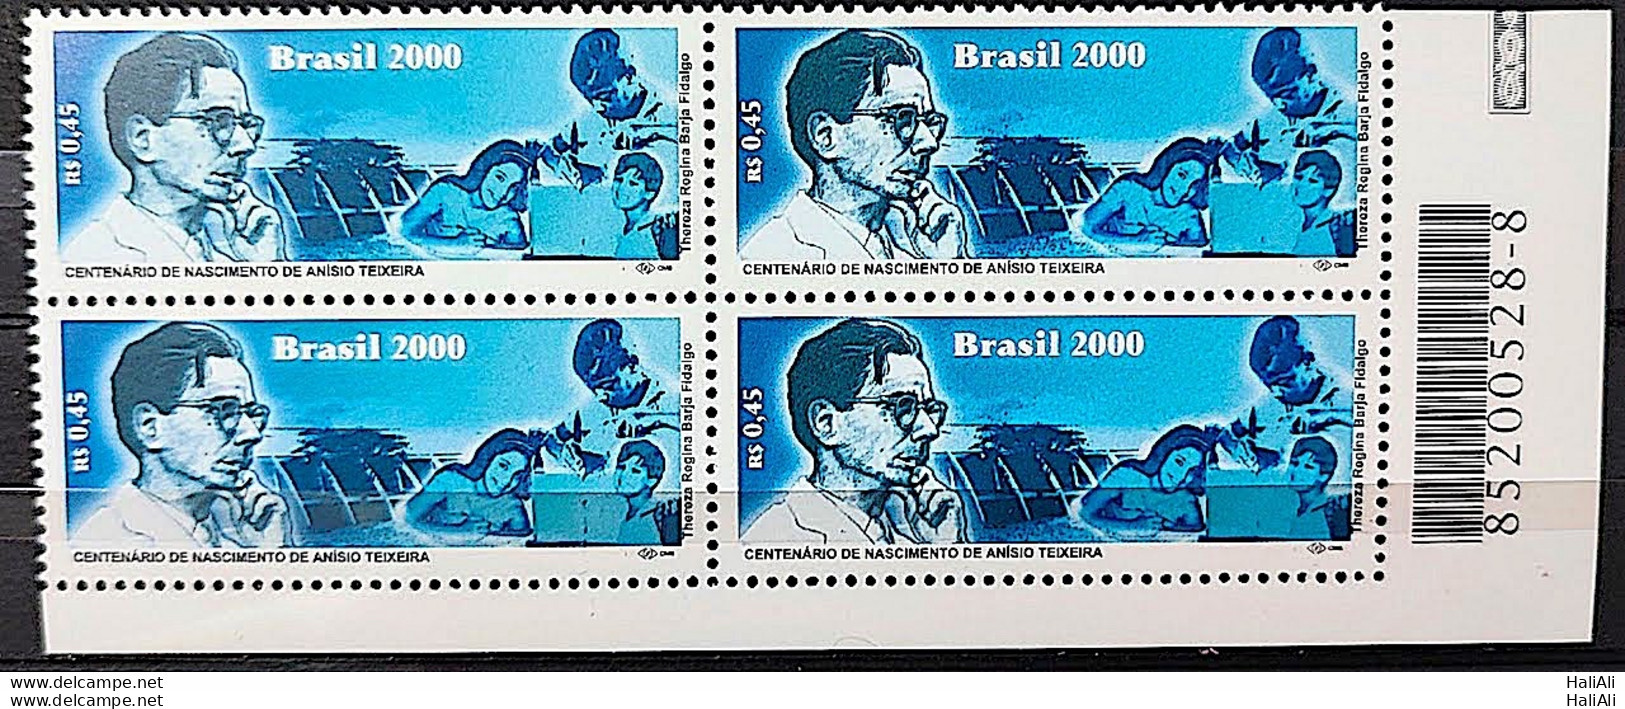 C 2294 Brazil Stamp Centenary Anisio Teixeira Education Child Classes 2000 Block Of 4 Bar Code - Unused Stamps